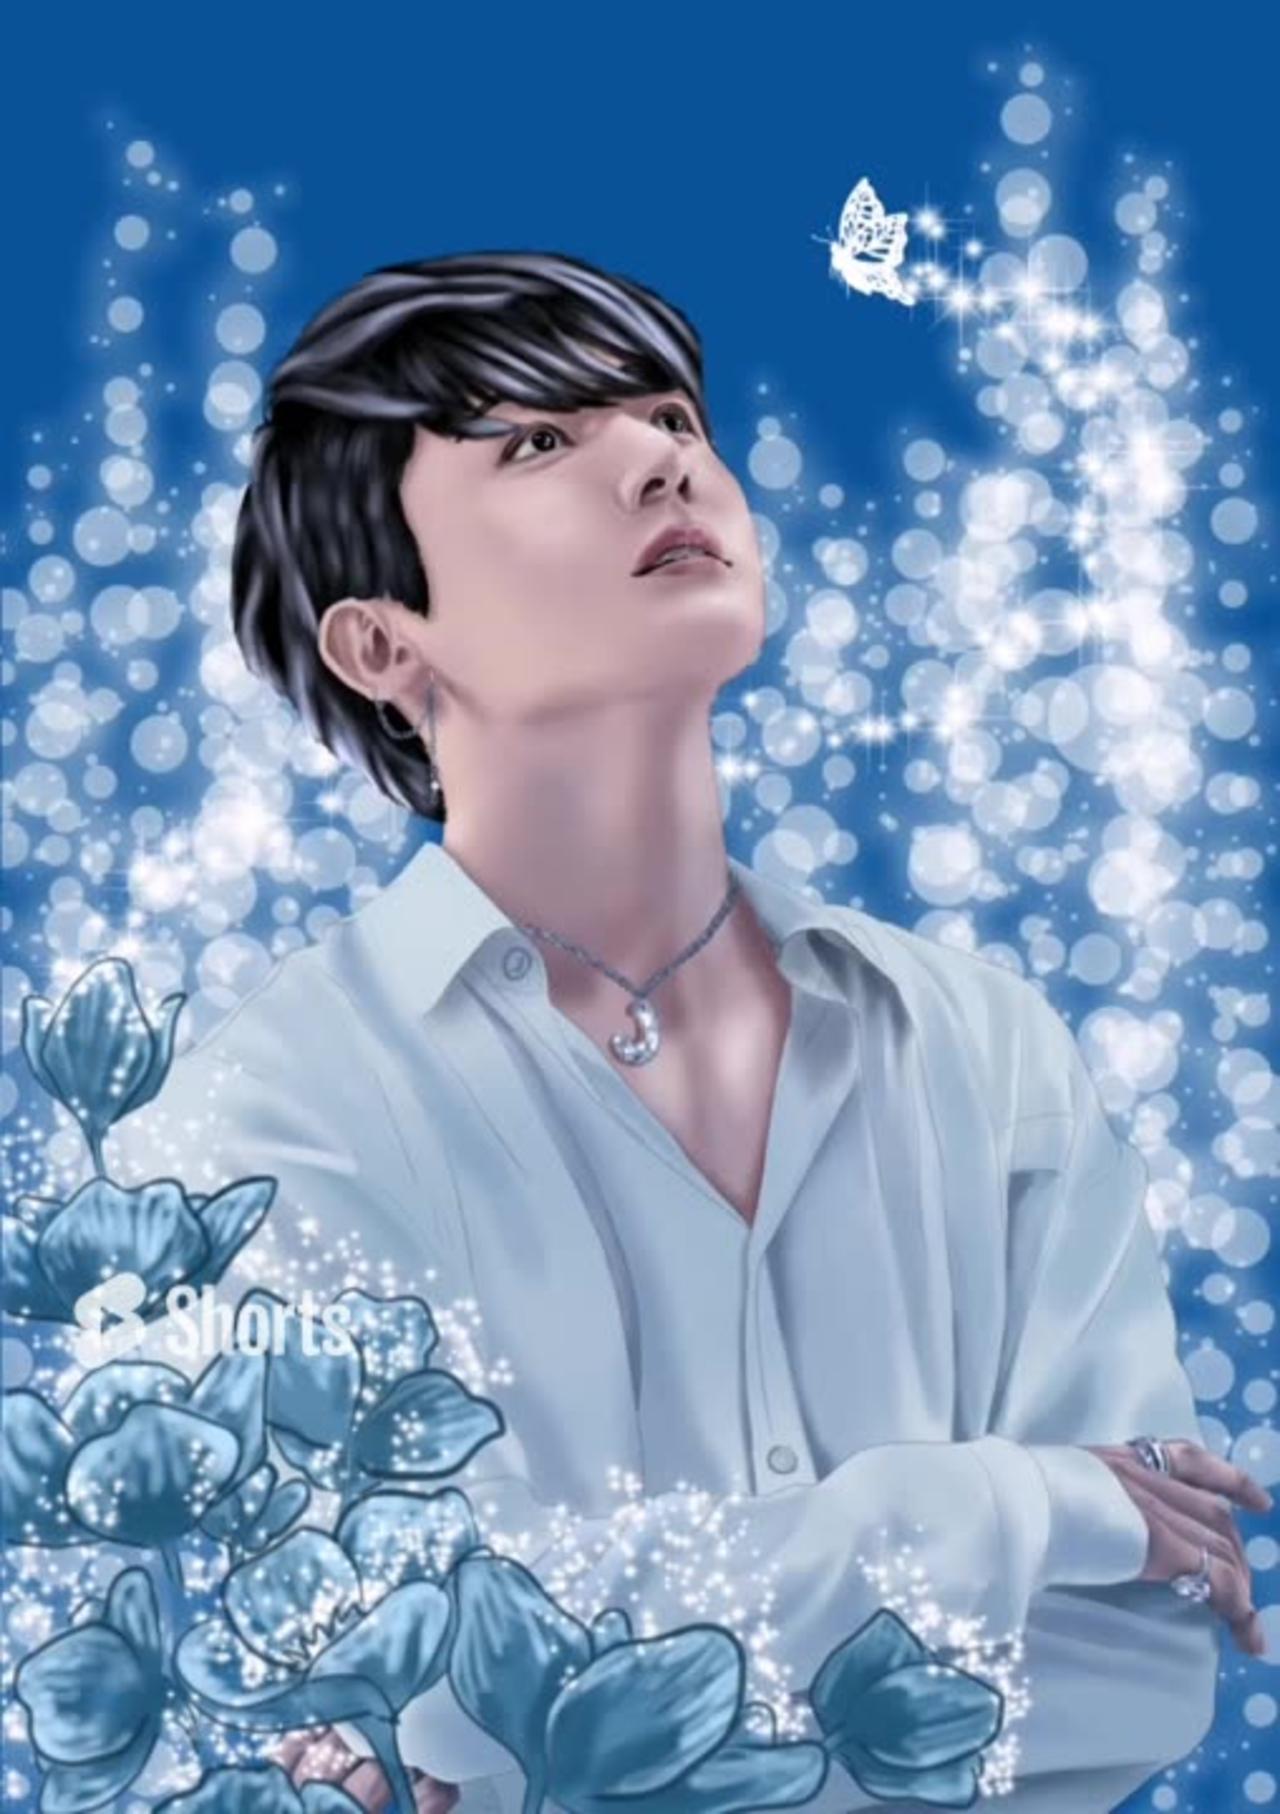 Bts Jungkook with magic butterfly-timelapse